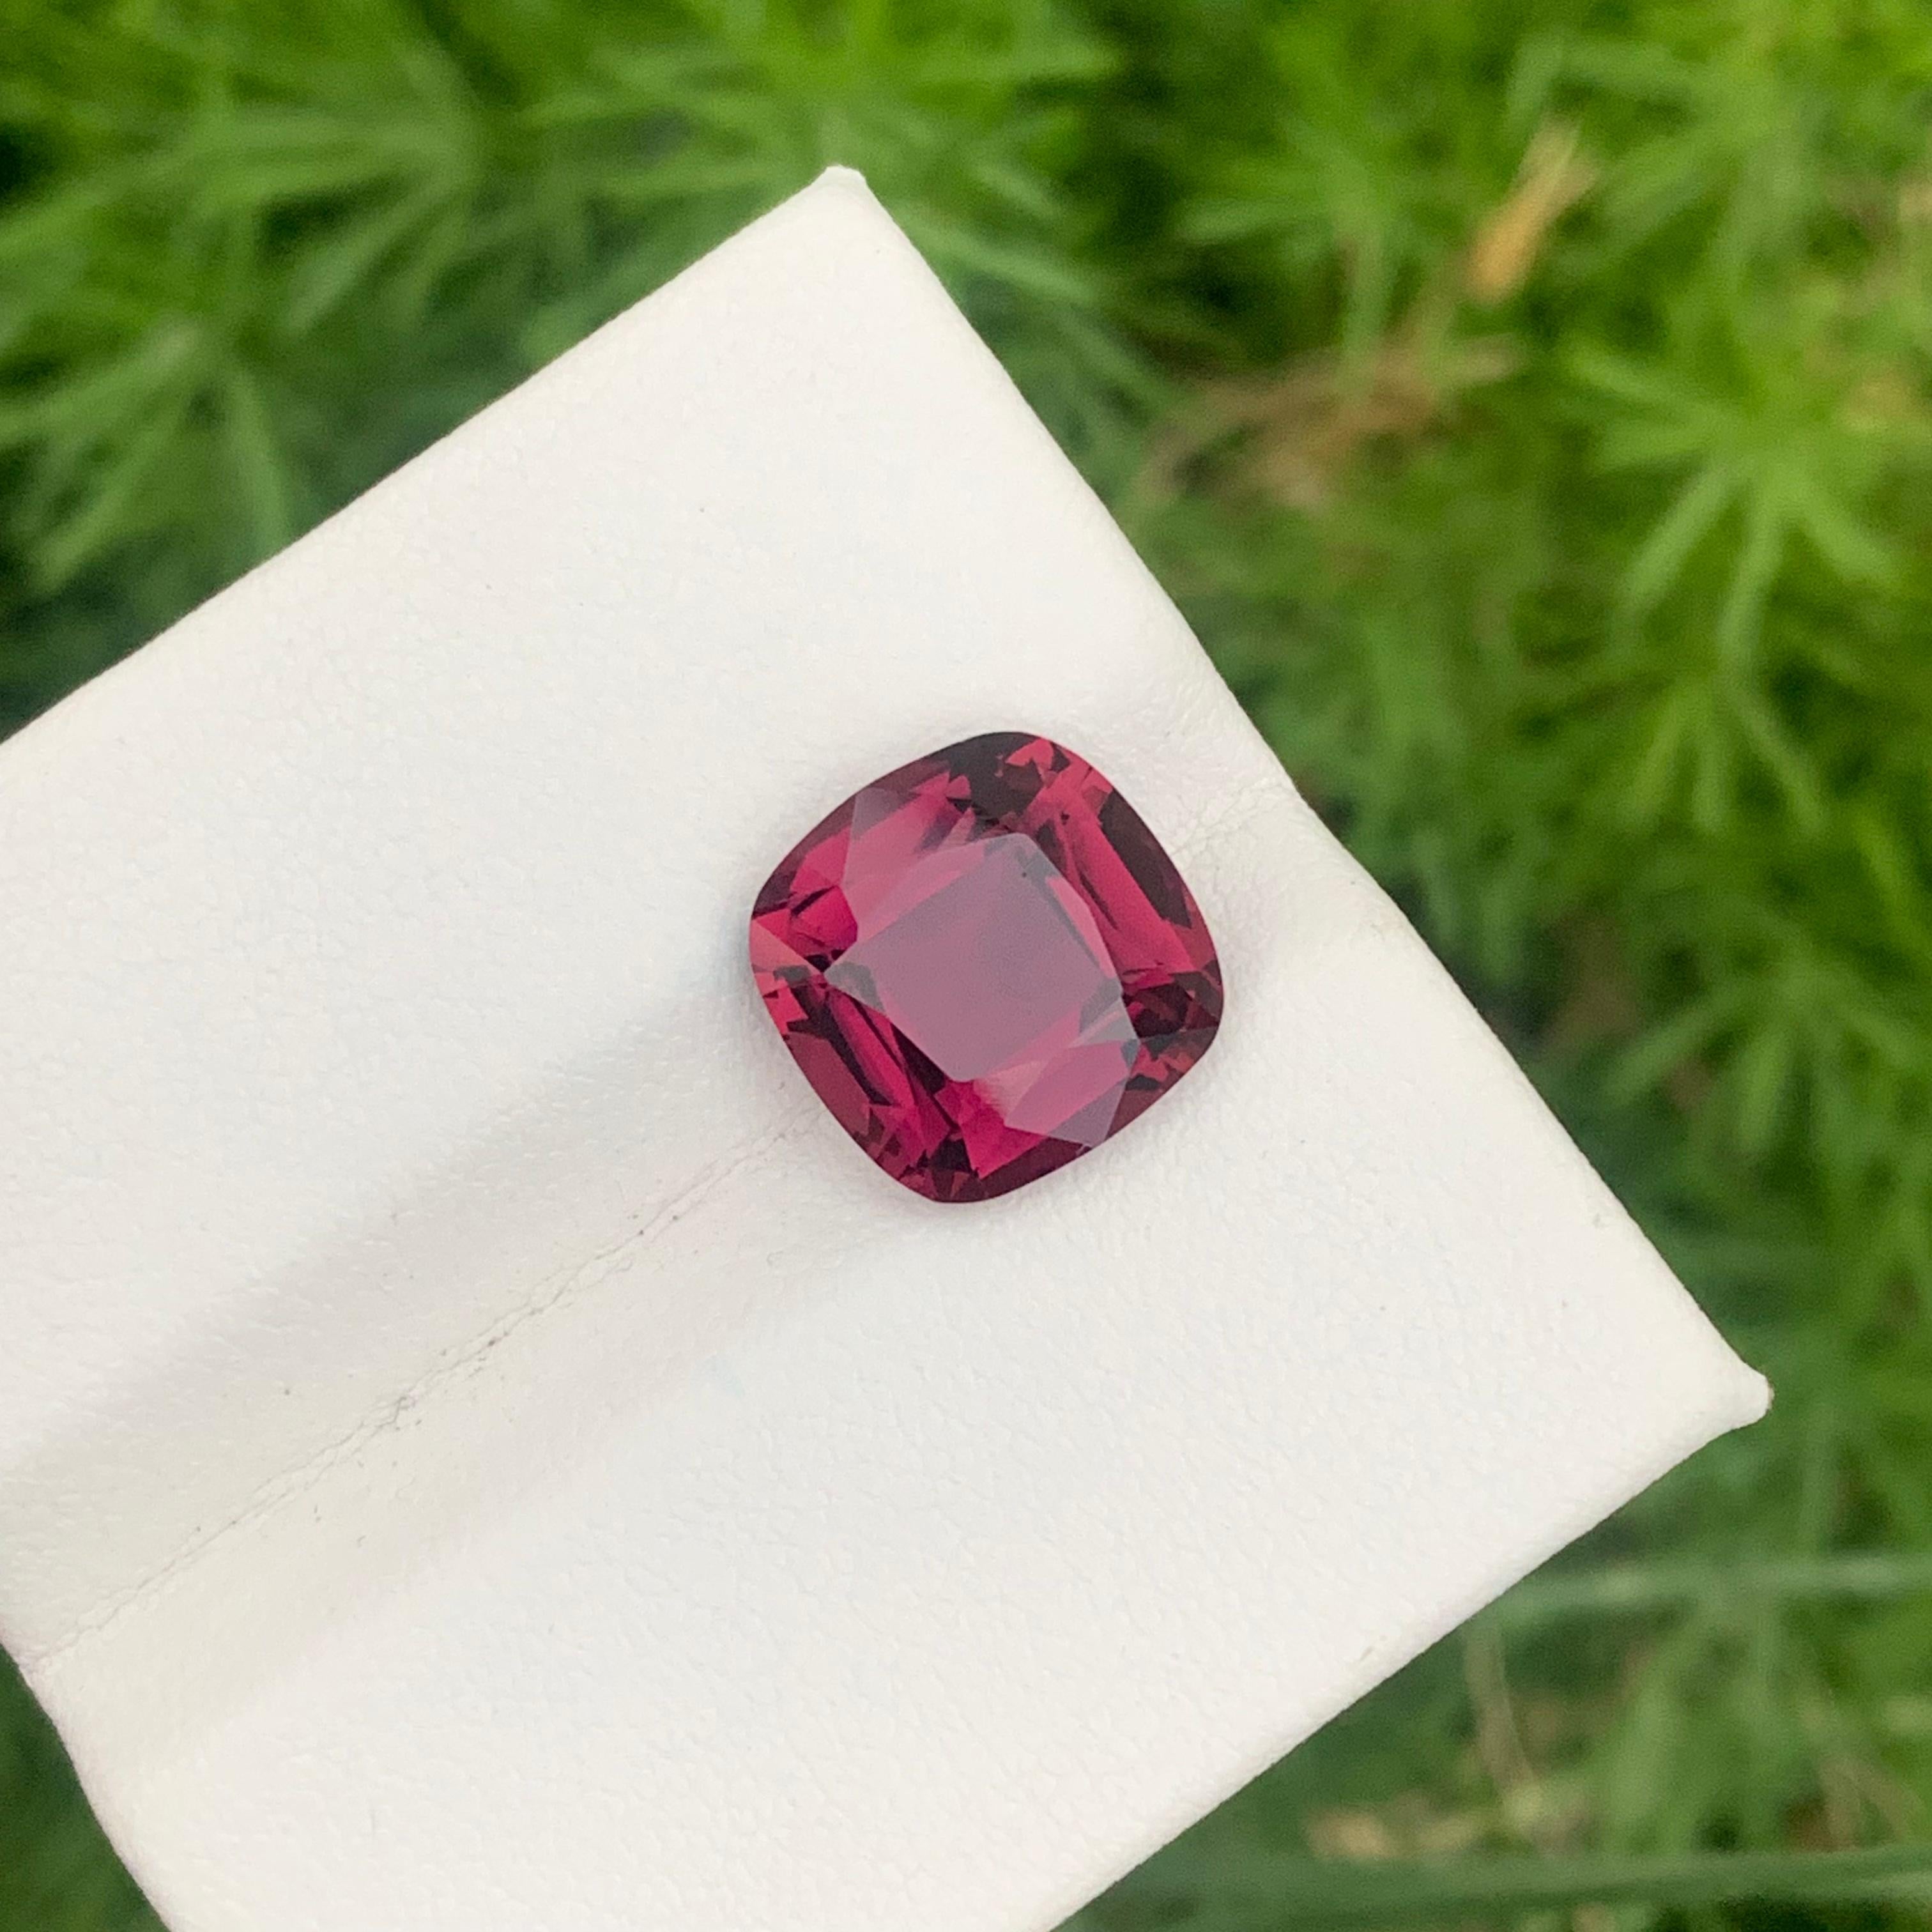 Faceted Rubellite Tourmaline 
Weight: 5.30 Carats
Dimensions: 11.8x11.7x6.7 Mm
Origin: Kunar Afghanistan
Shape: Cushion
Color: Pink Red
Treated: Non / Natural 
Certificate: On Customer Demand 
.
Rubellite is a specific variety of tourmaline, which